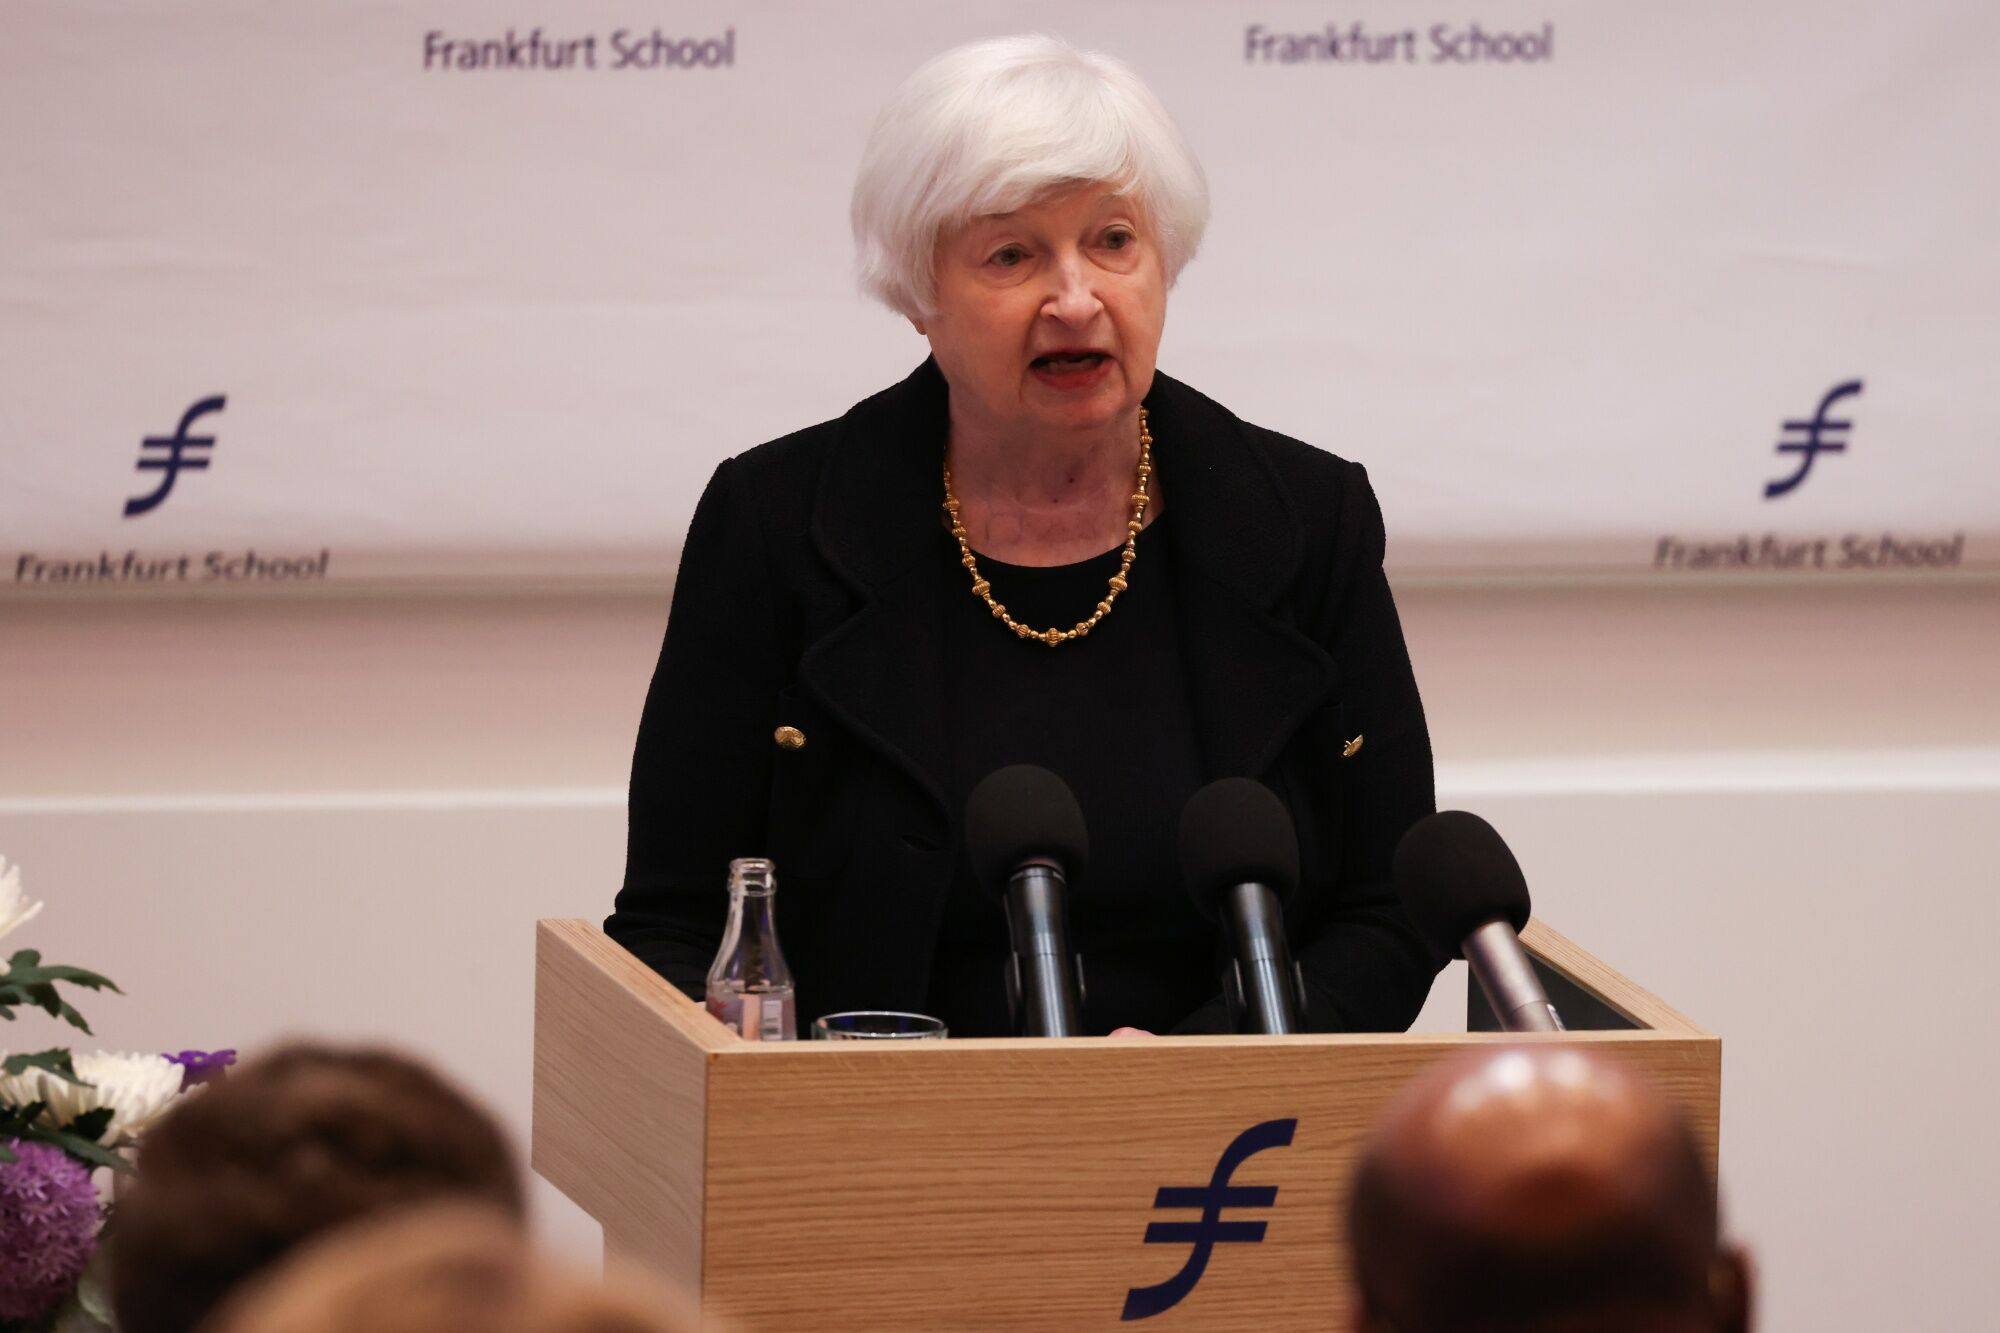 Janet Yellen, US treasury secretary, delivers a speech at the Frankfurt School of Finance and Management in Frankfurt, Germany, on Tuesday. Yellen said the US, Europe must respond in “united way” to China’s overcapacity. Photo: Bloomberg